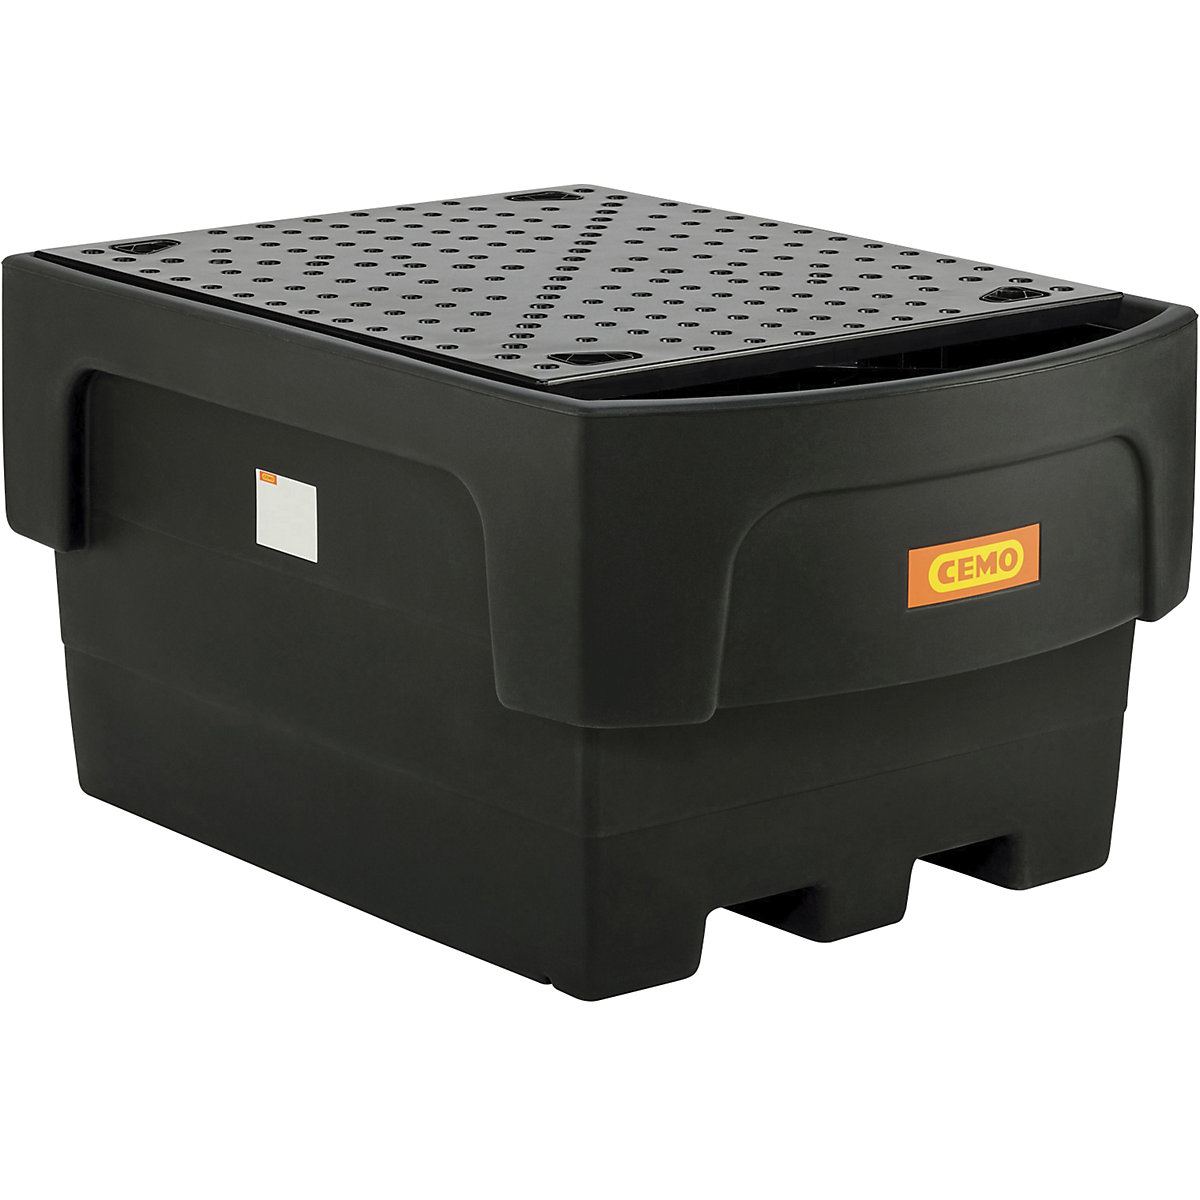 PE sump tray for IBC/CTC tank containers – CEMO